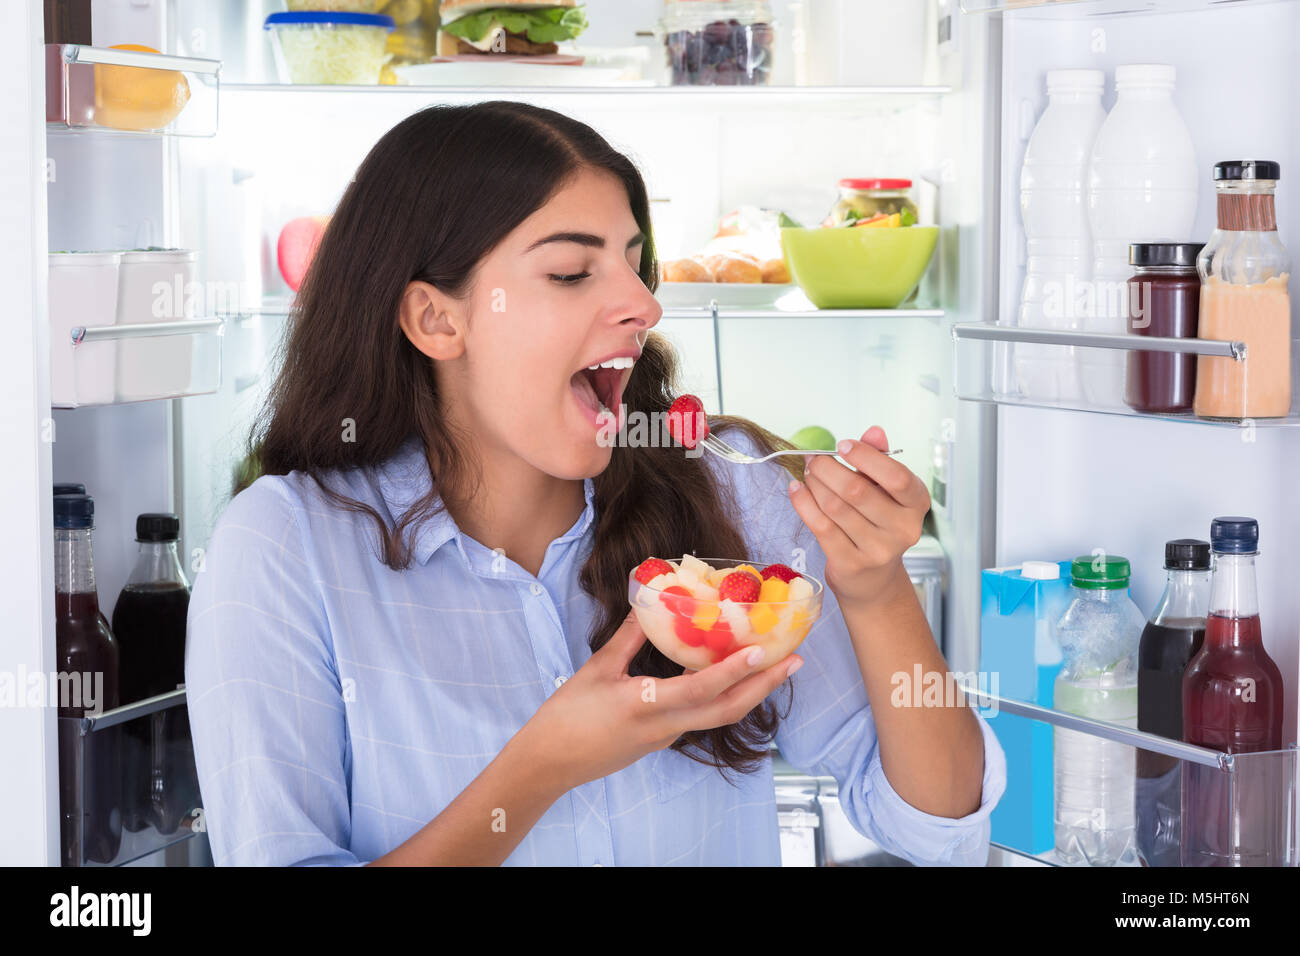 Close-up Of A Young Woman Eating Fresh Fruits In Bowl Stock Photo